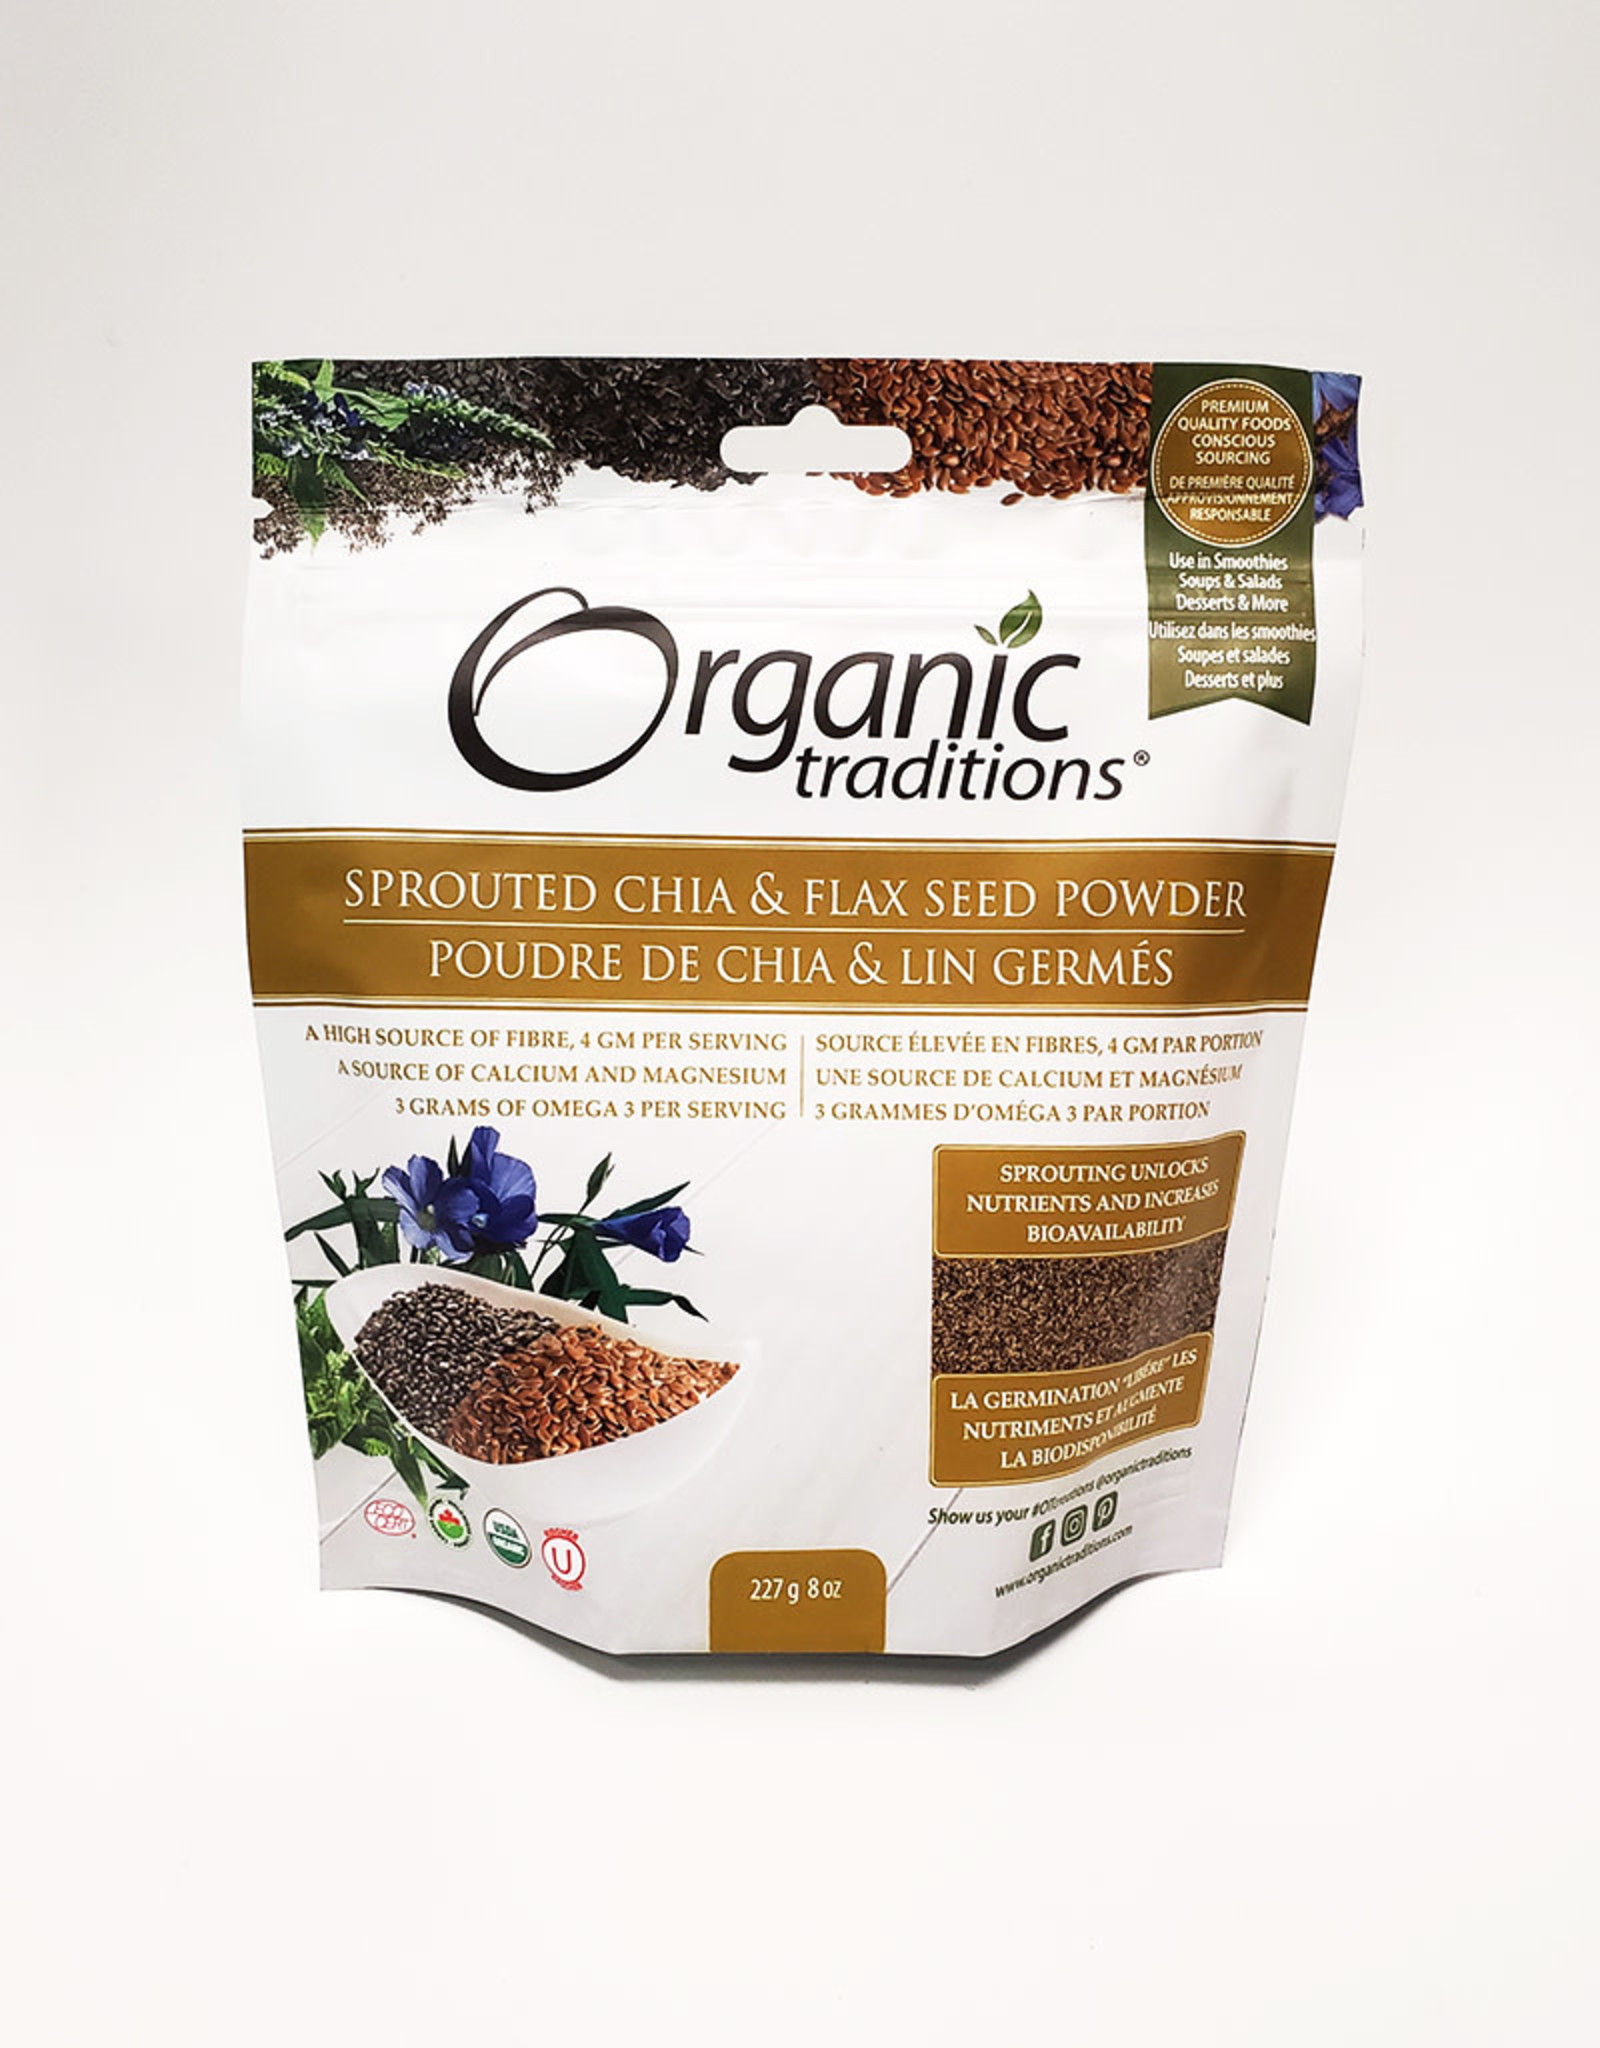 Organic Traditions Organic Traditions - Sprouted Chia and Flax Seed Powder (227g)